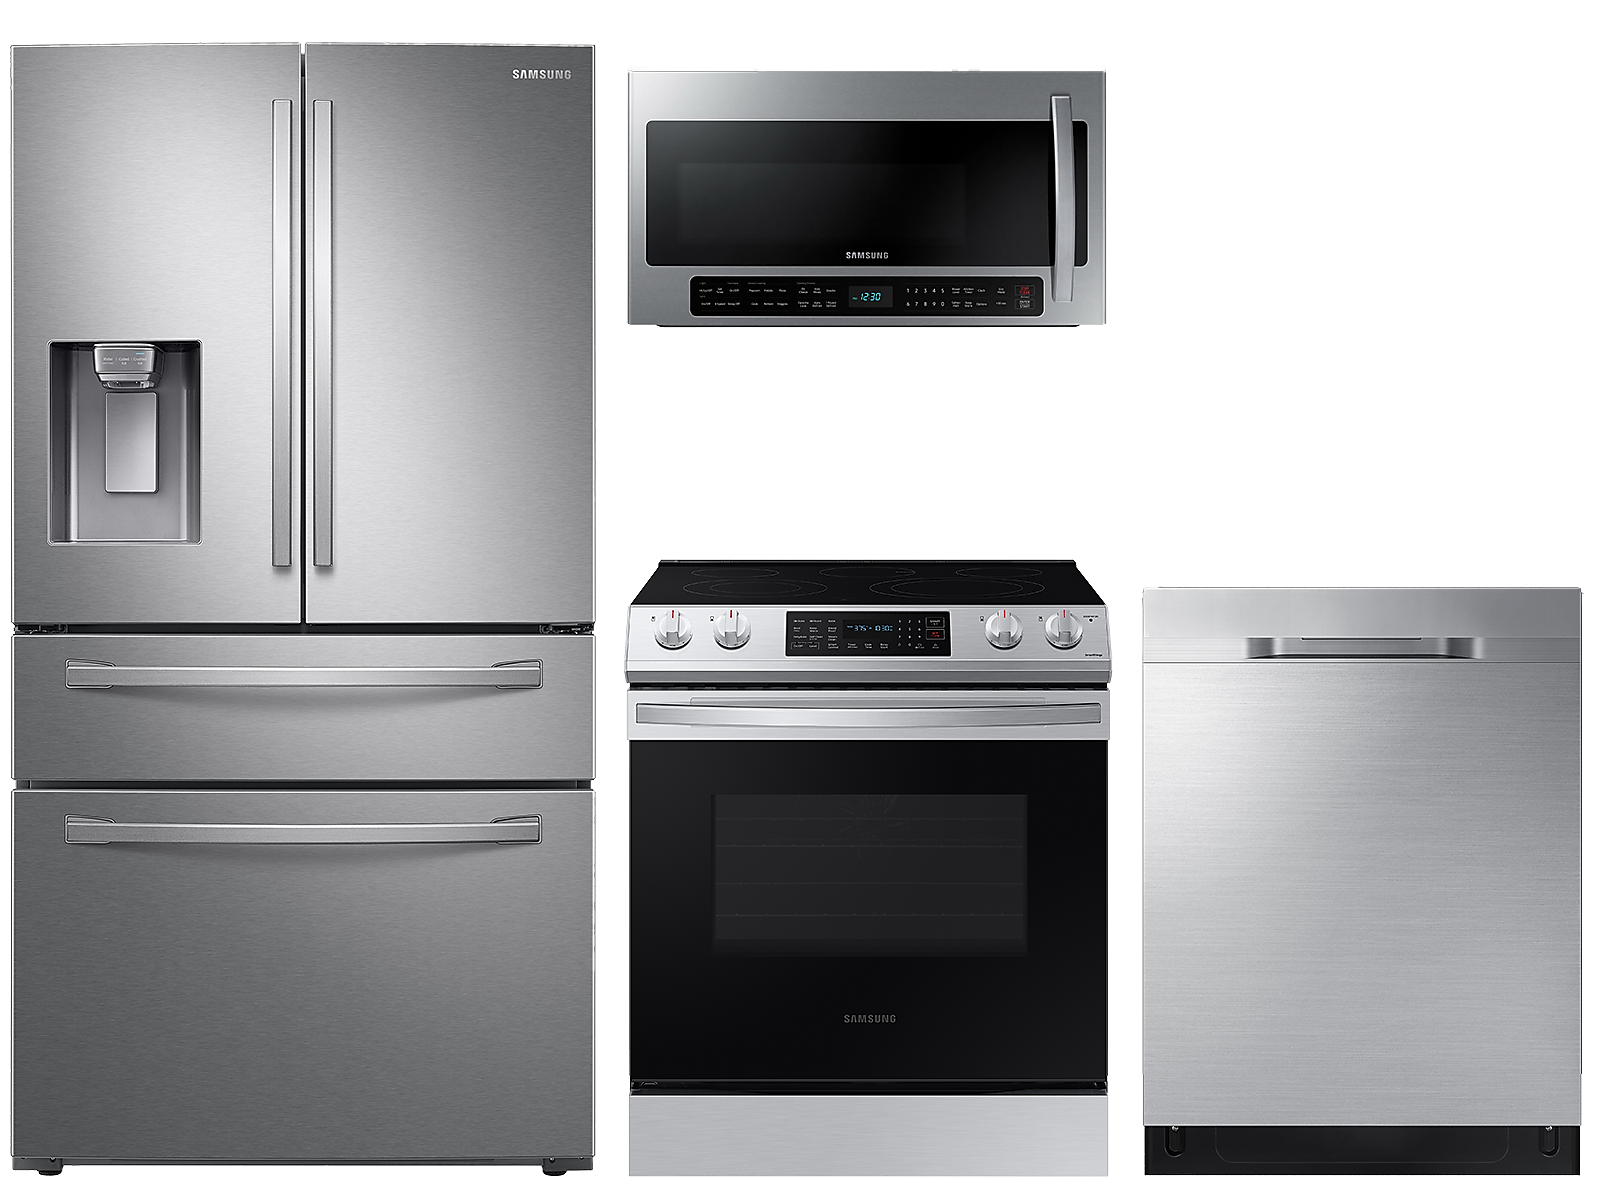 Samsung 23 cu. ft. counter depth 4-door refrigerator, 6.3 cu. ft. electric range, 2.1 cu. ft. microwave and 48 dBA dishwasher package photo